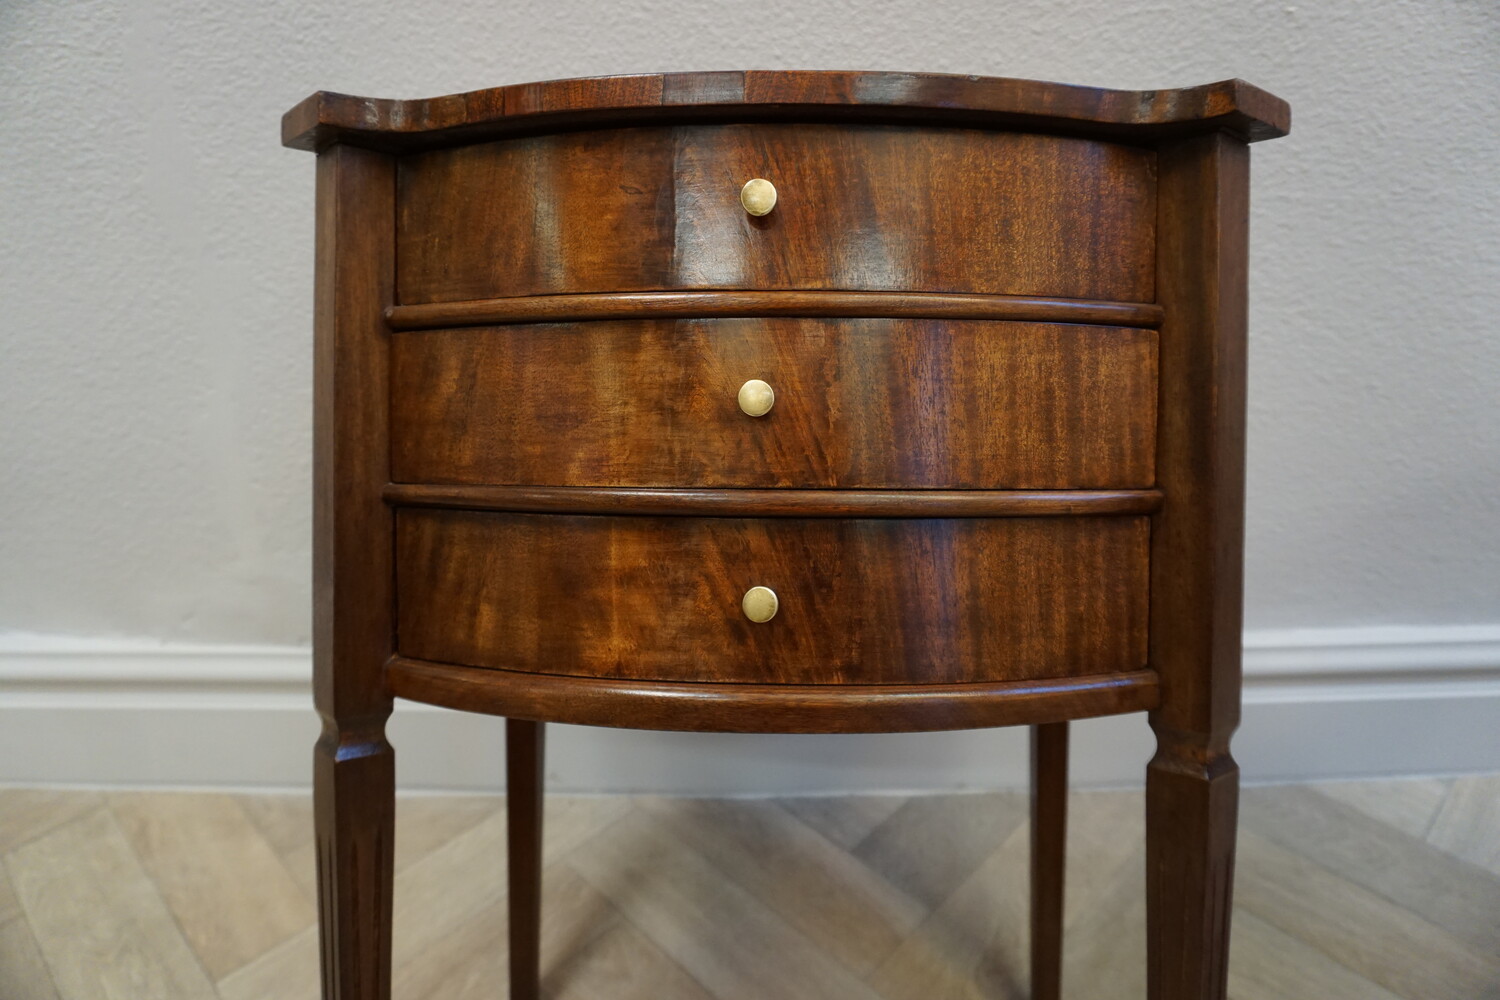 Pair of mahogany bedside tablesSOLD